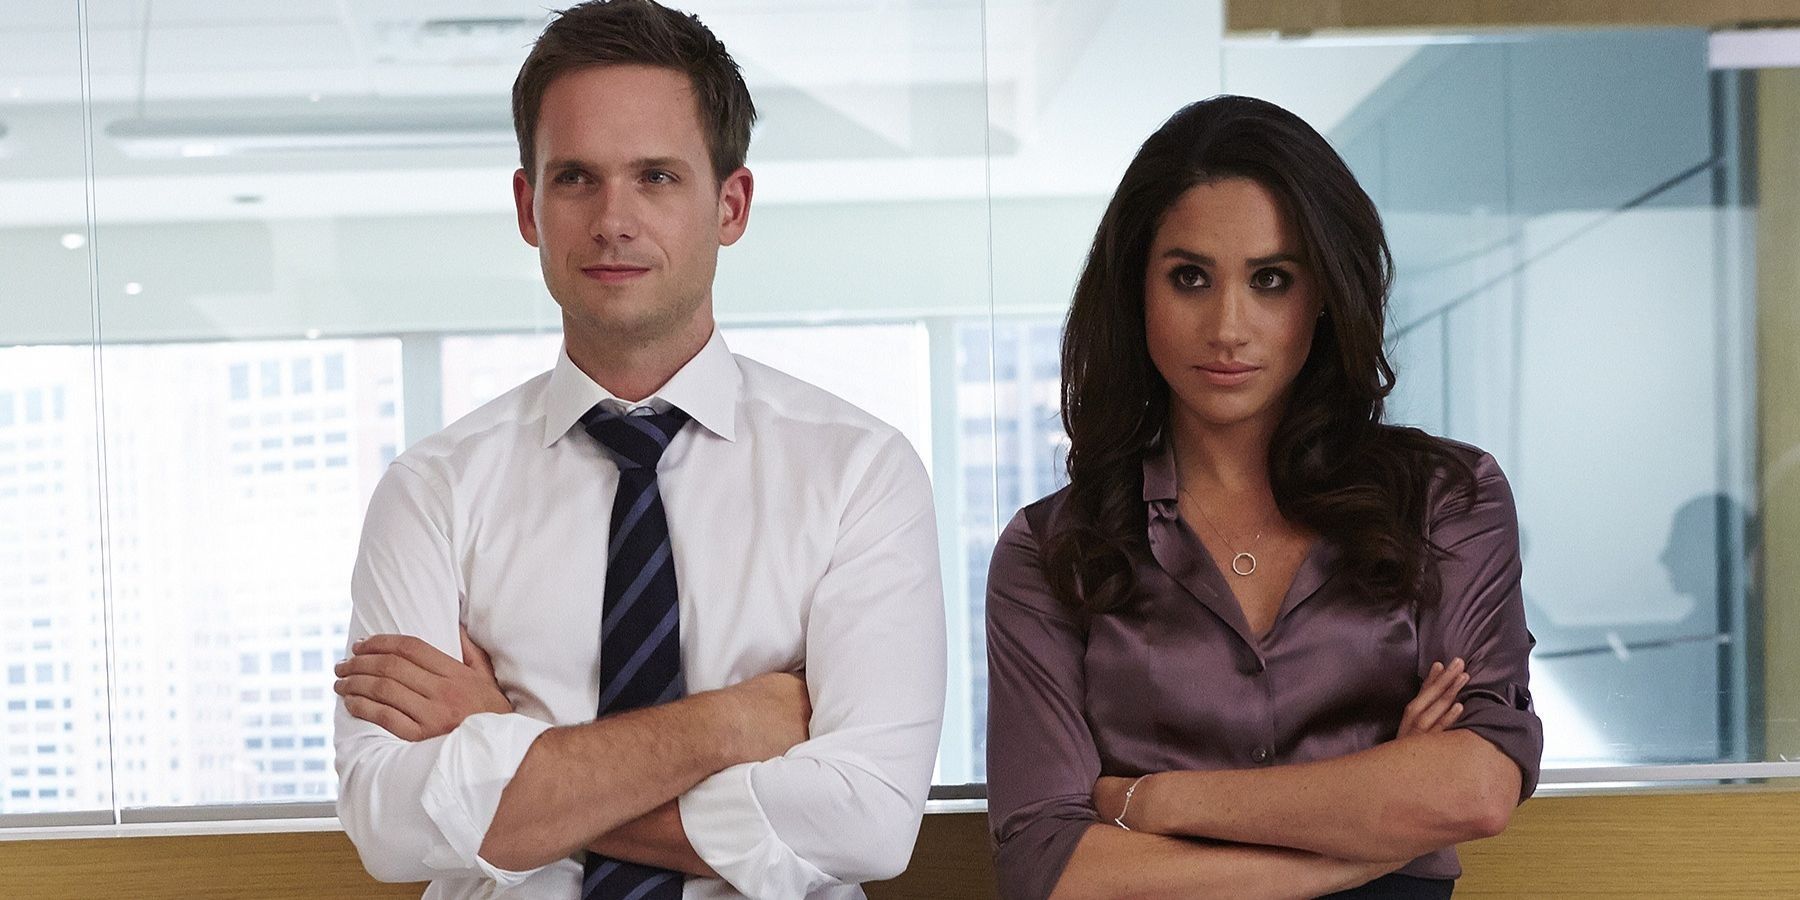 Mike Ross and Rachel Zane work in a law firm.